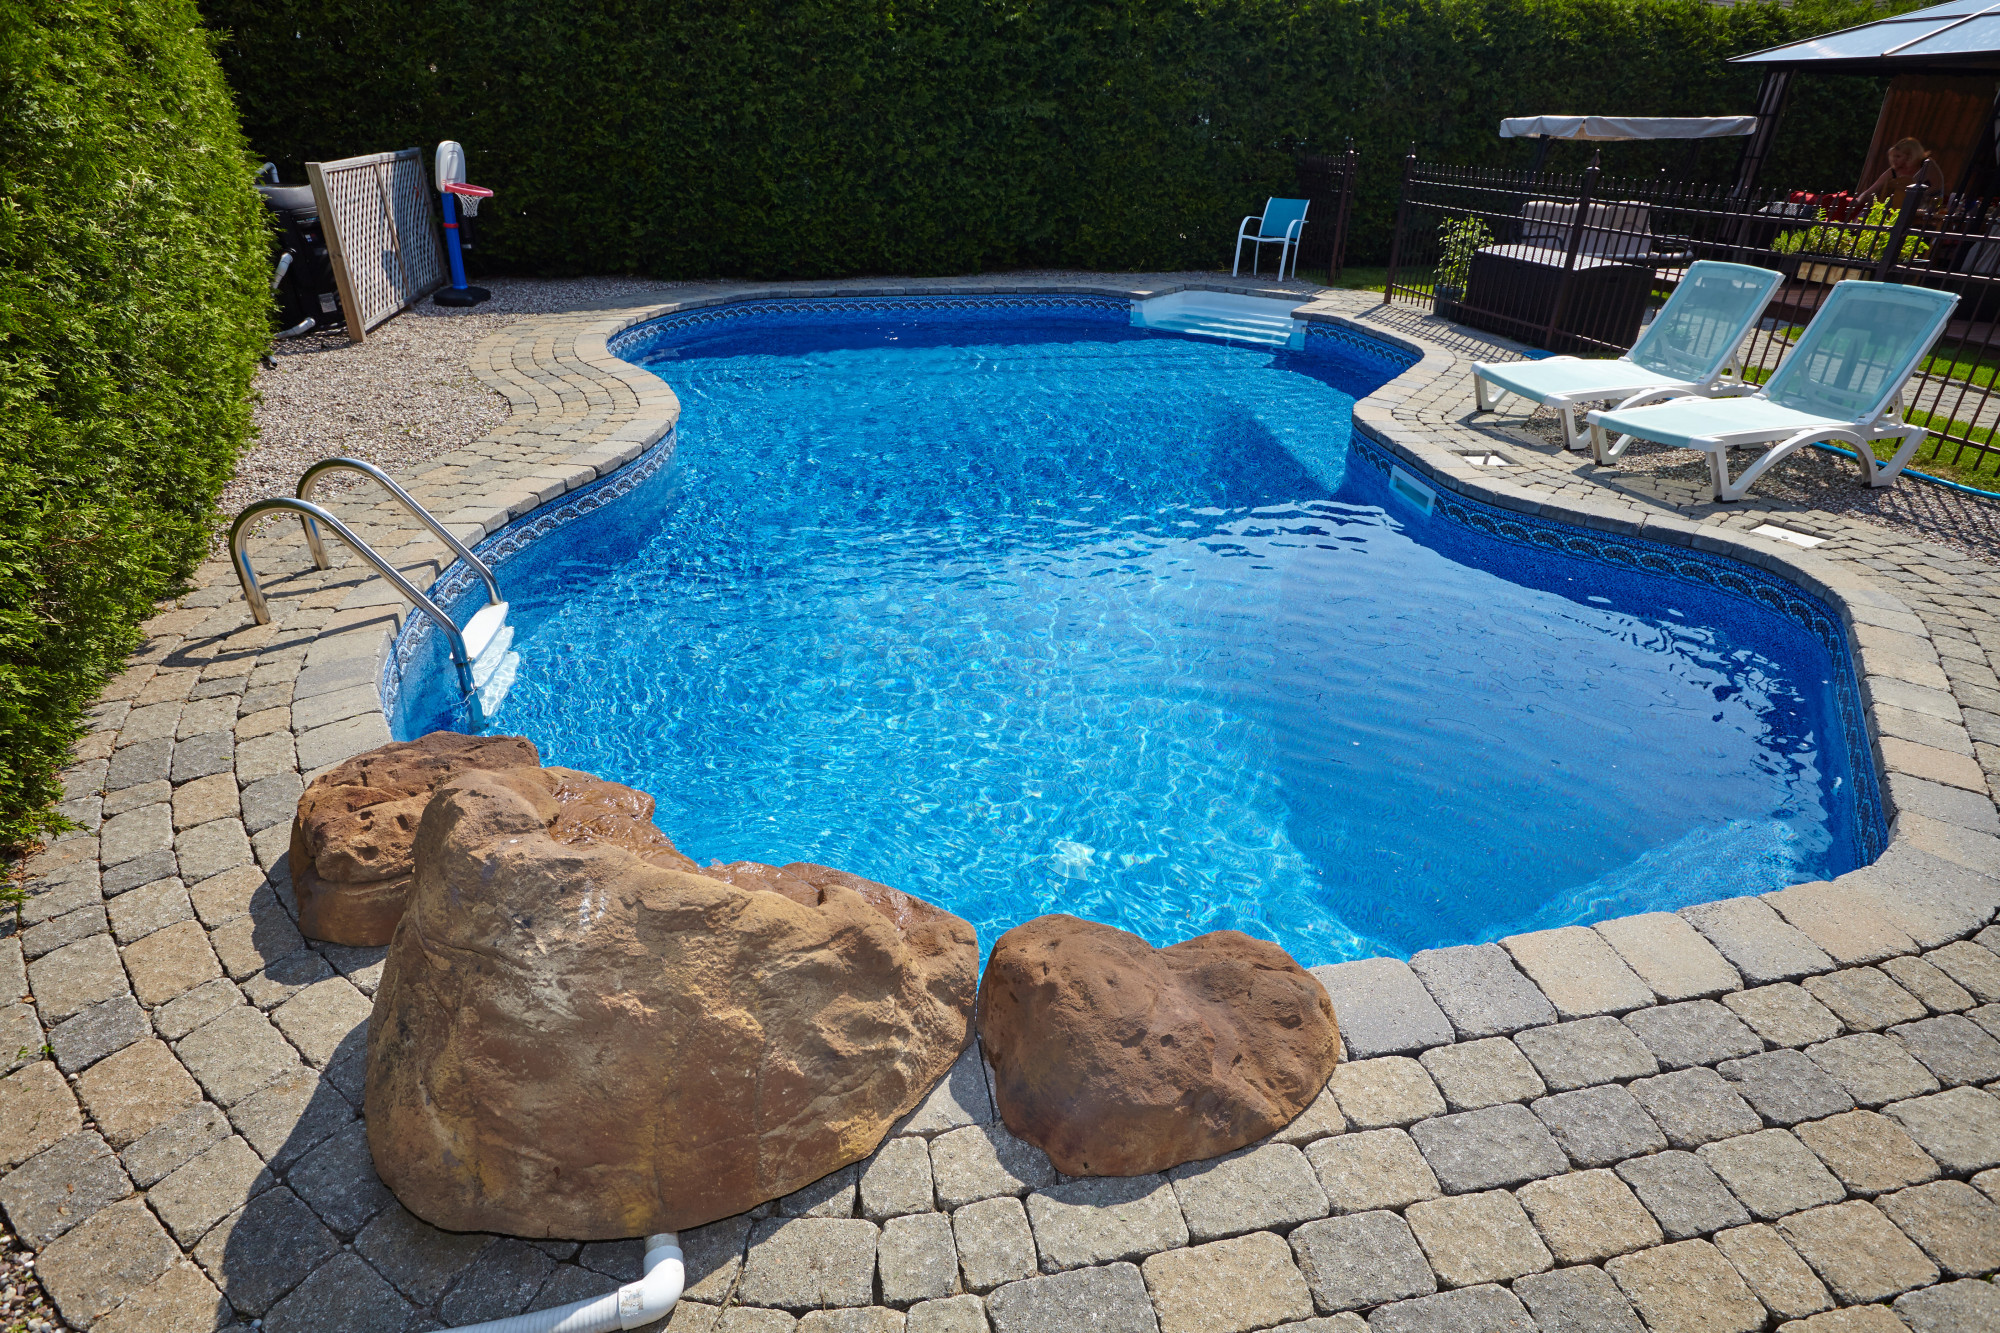 Radiant Pools: 8 Things to Love About Energy Efficient Pools